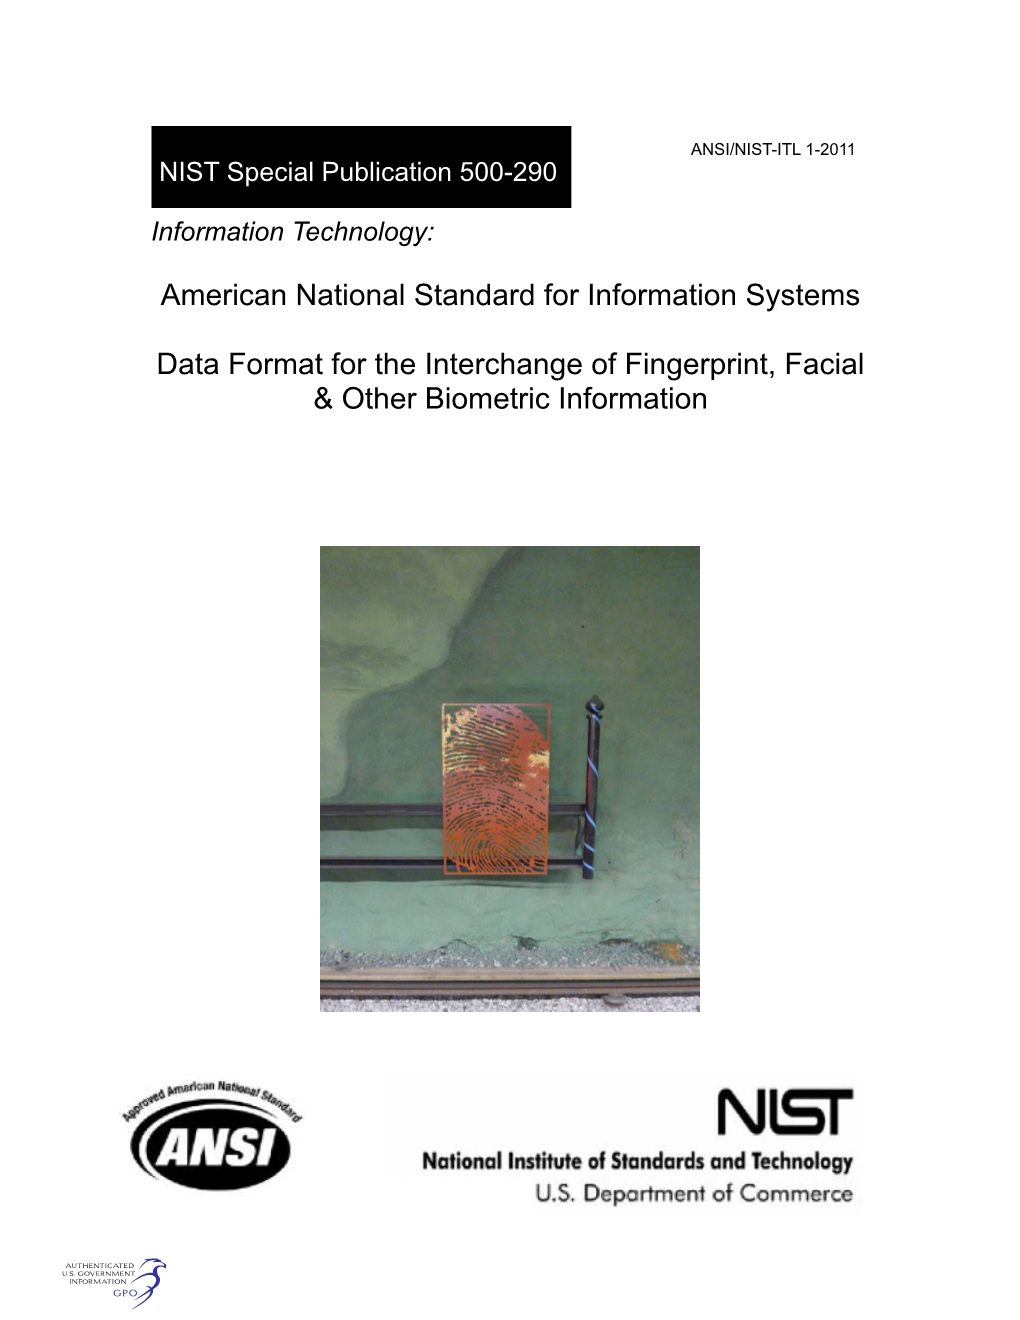 American National Standard for Information Systems-Data Format For